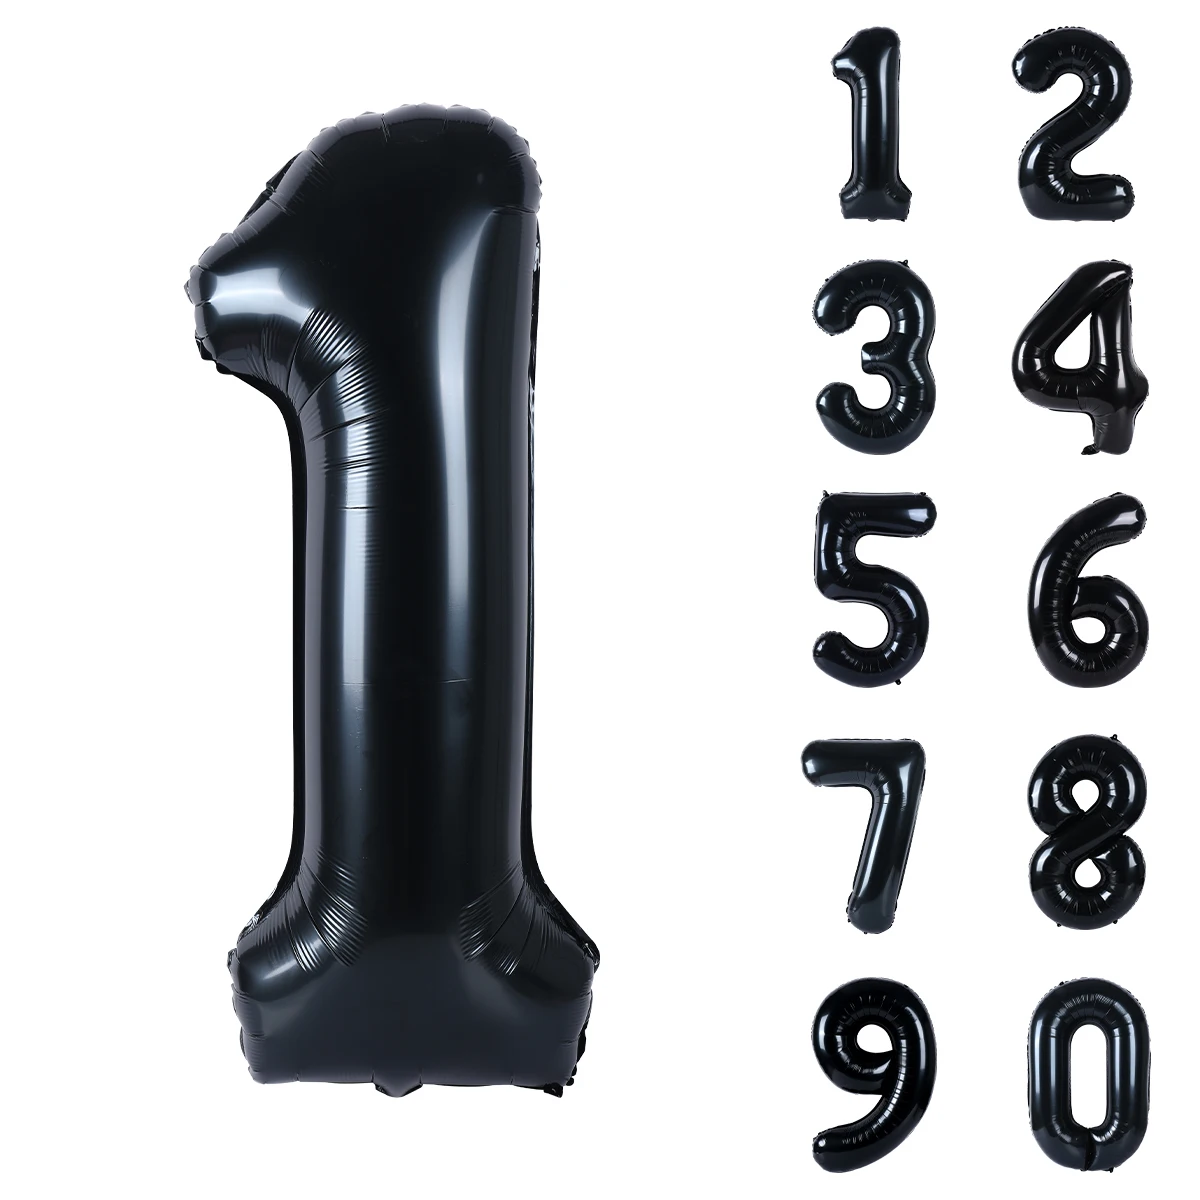 

40inch Giant Black Number 0-9 Helium Foil Balloons Happy Birthday Party Decor Kids Baby Shower Anniversary Supplies Balloon